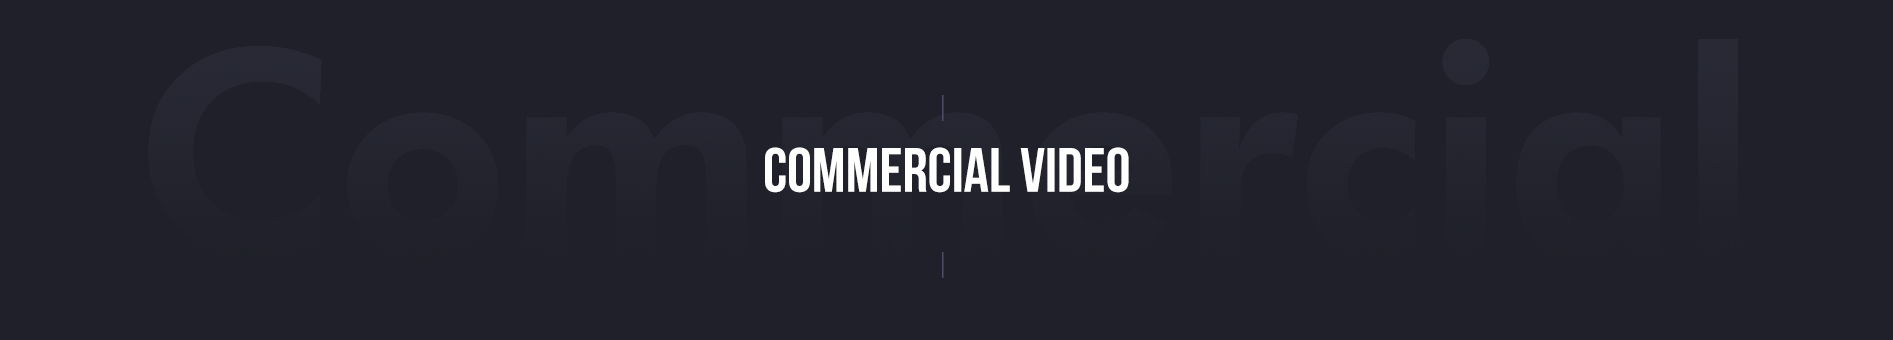 Commercial Video